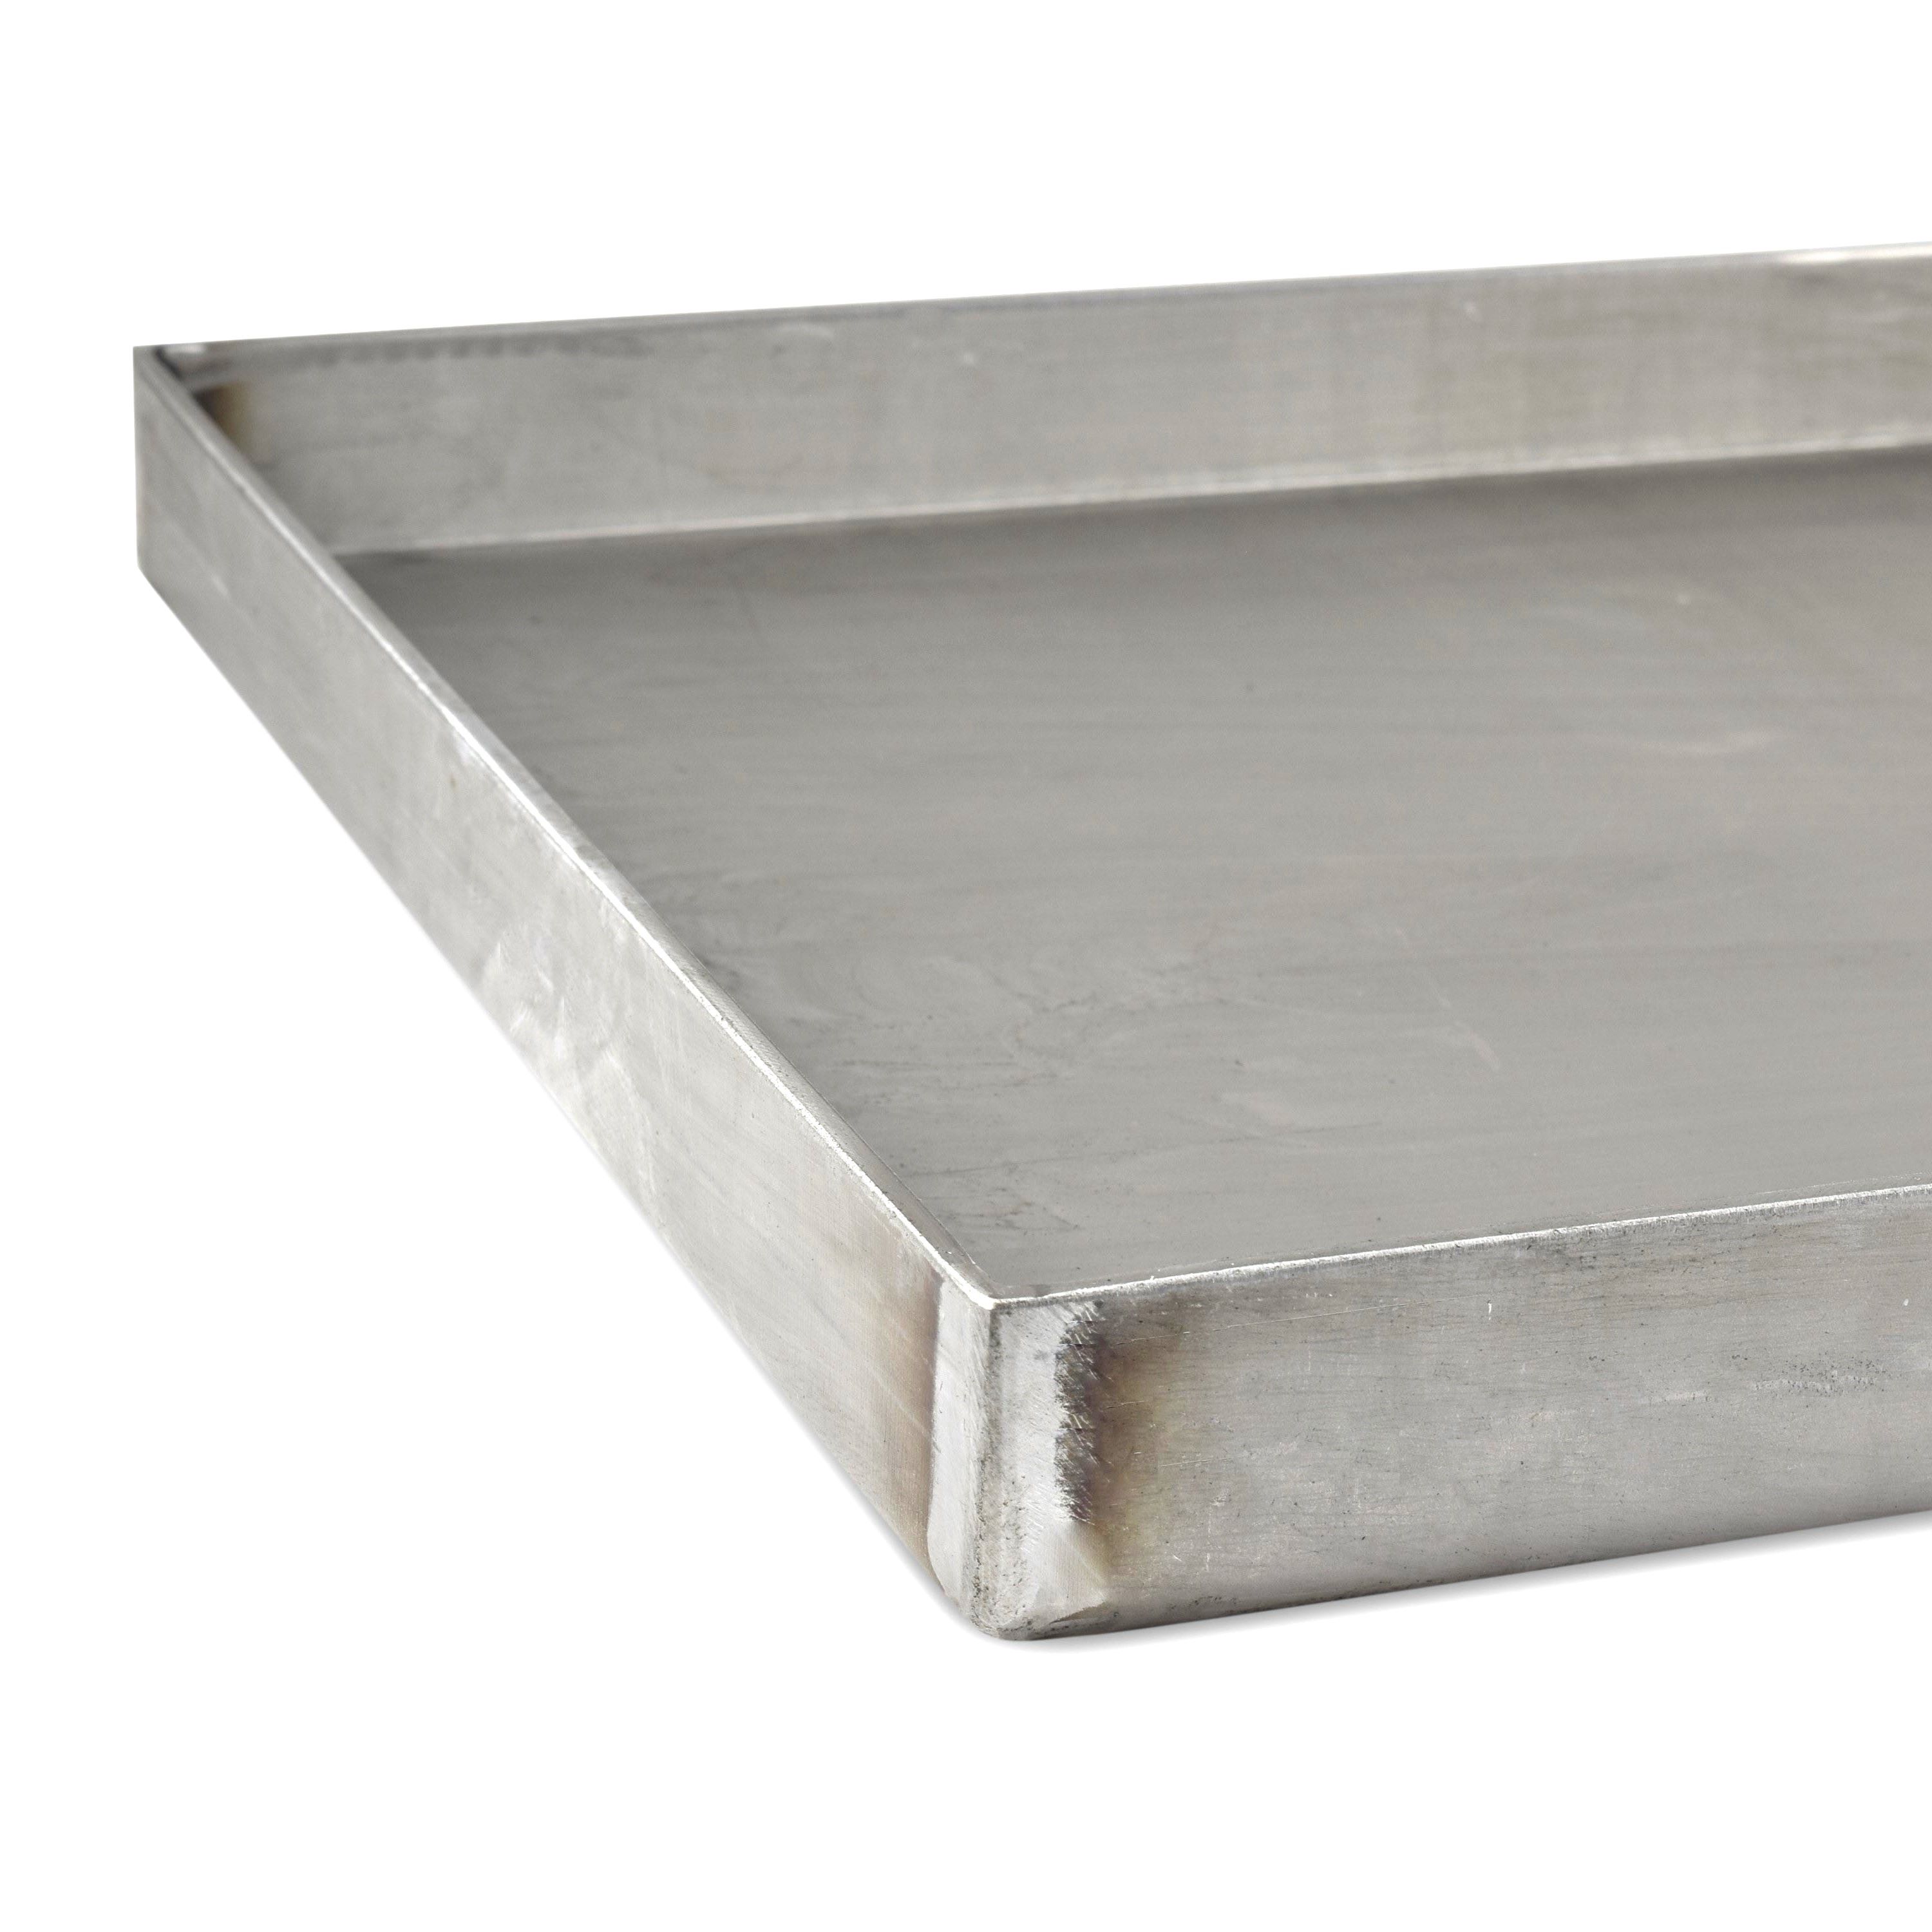 Solid steel fire pan Made to measure